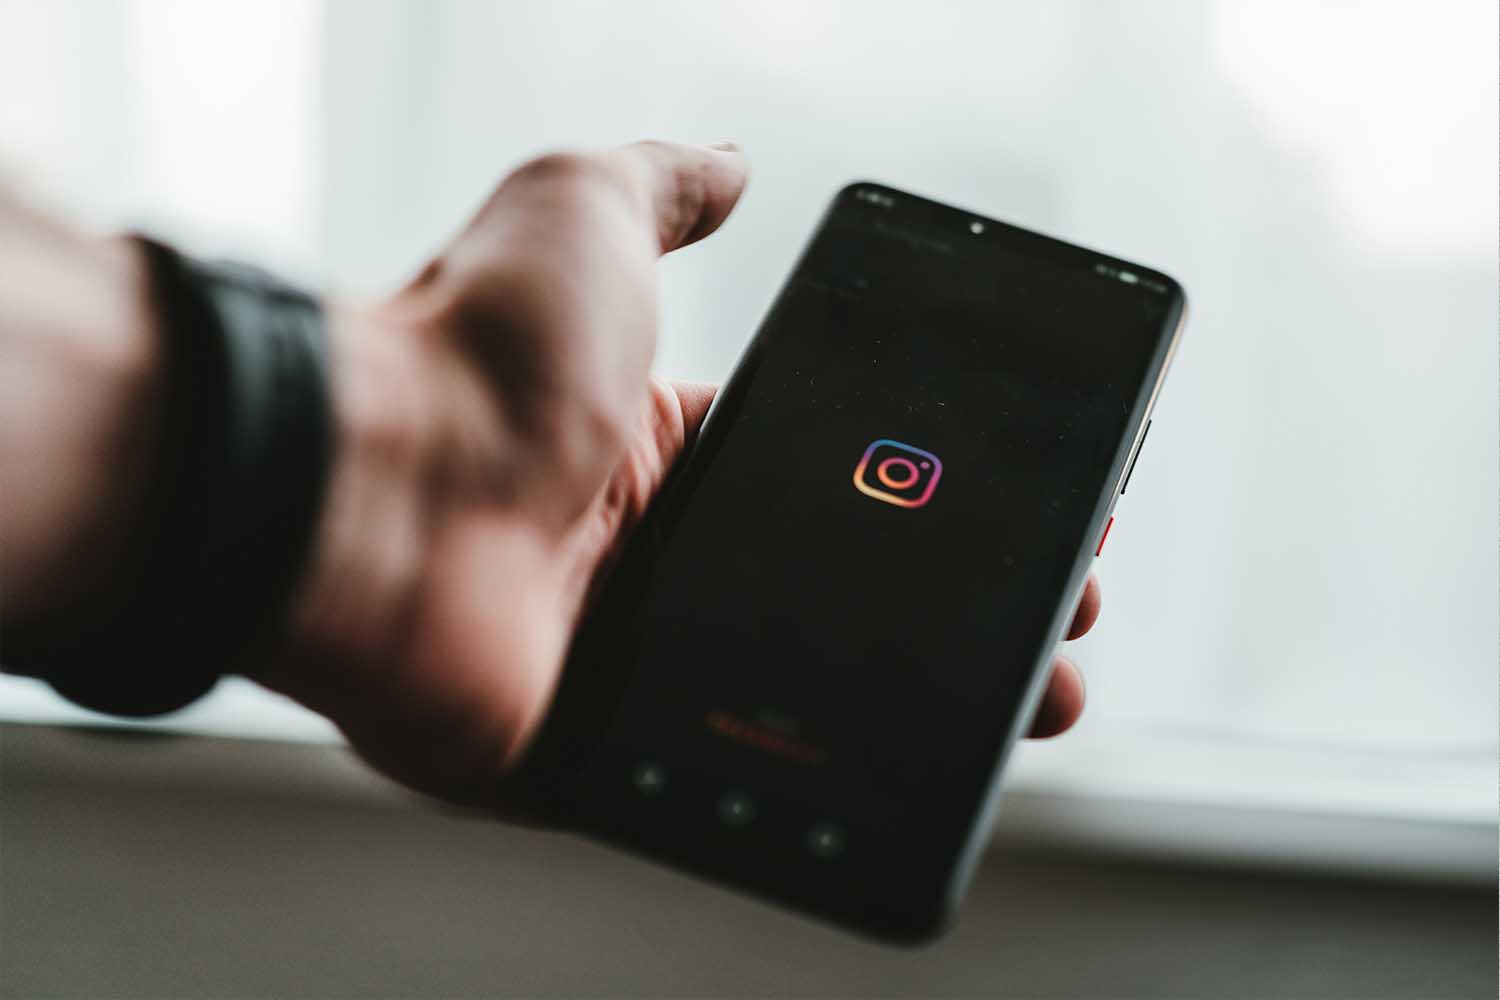 A person holding an iPhone with the Instagram logo.